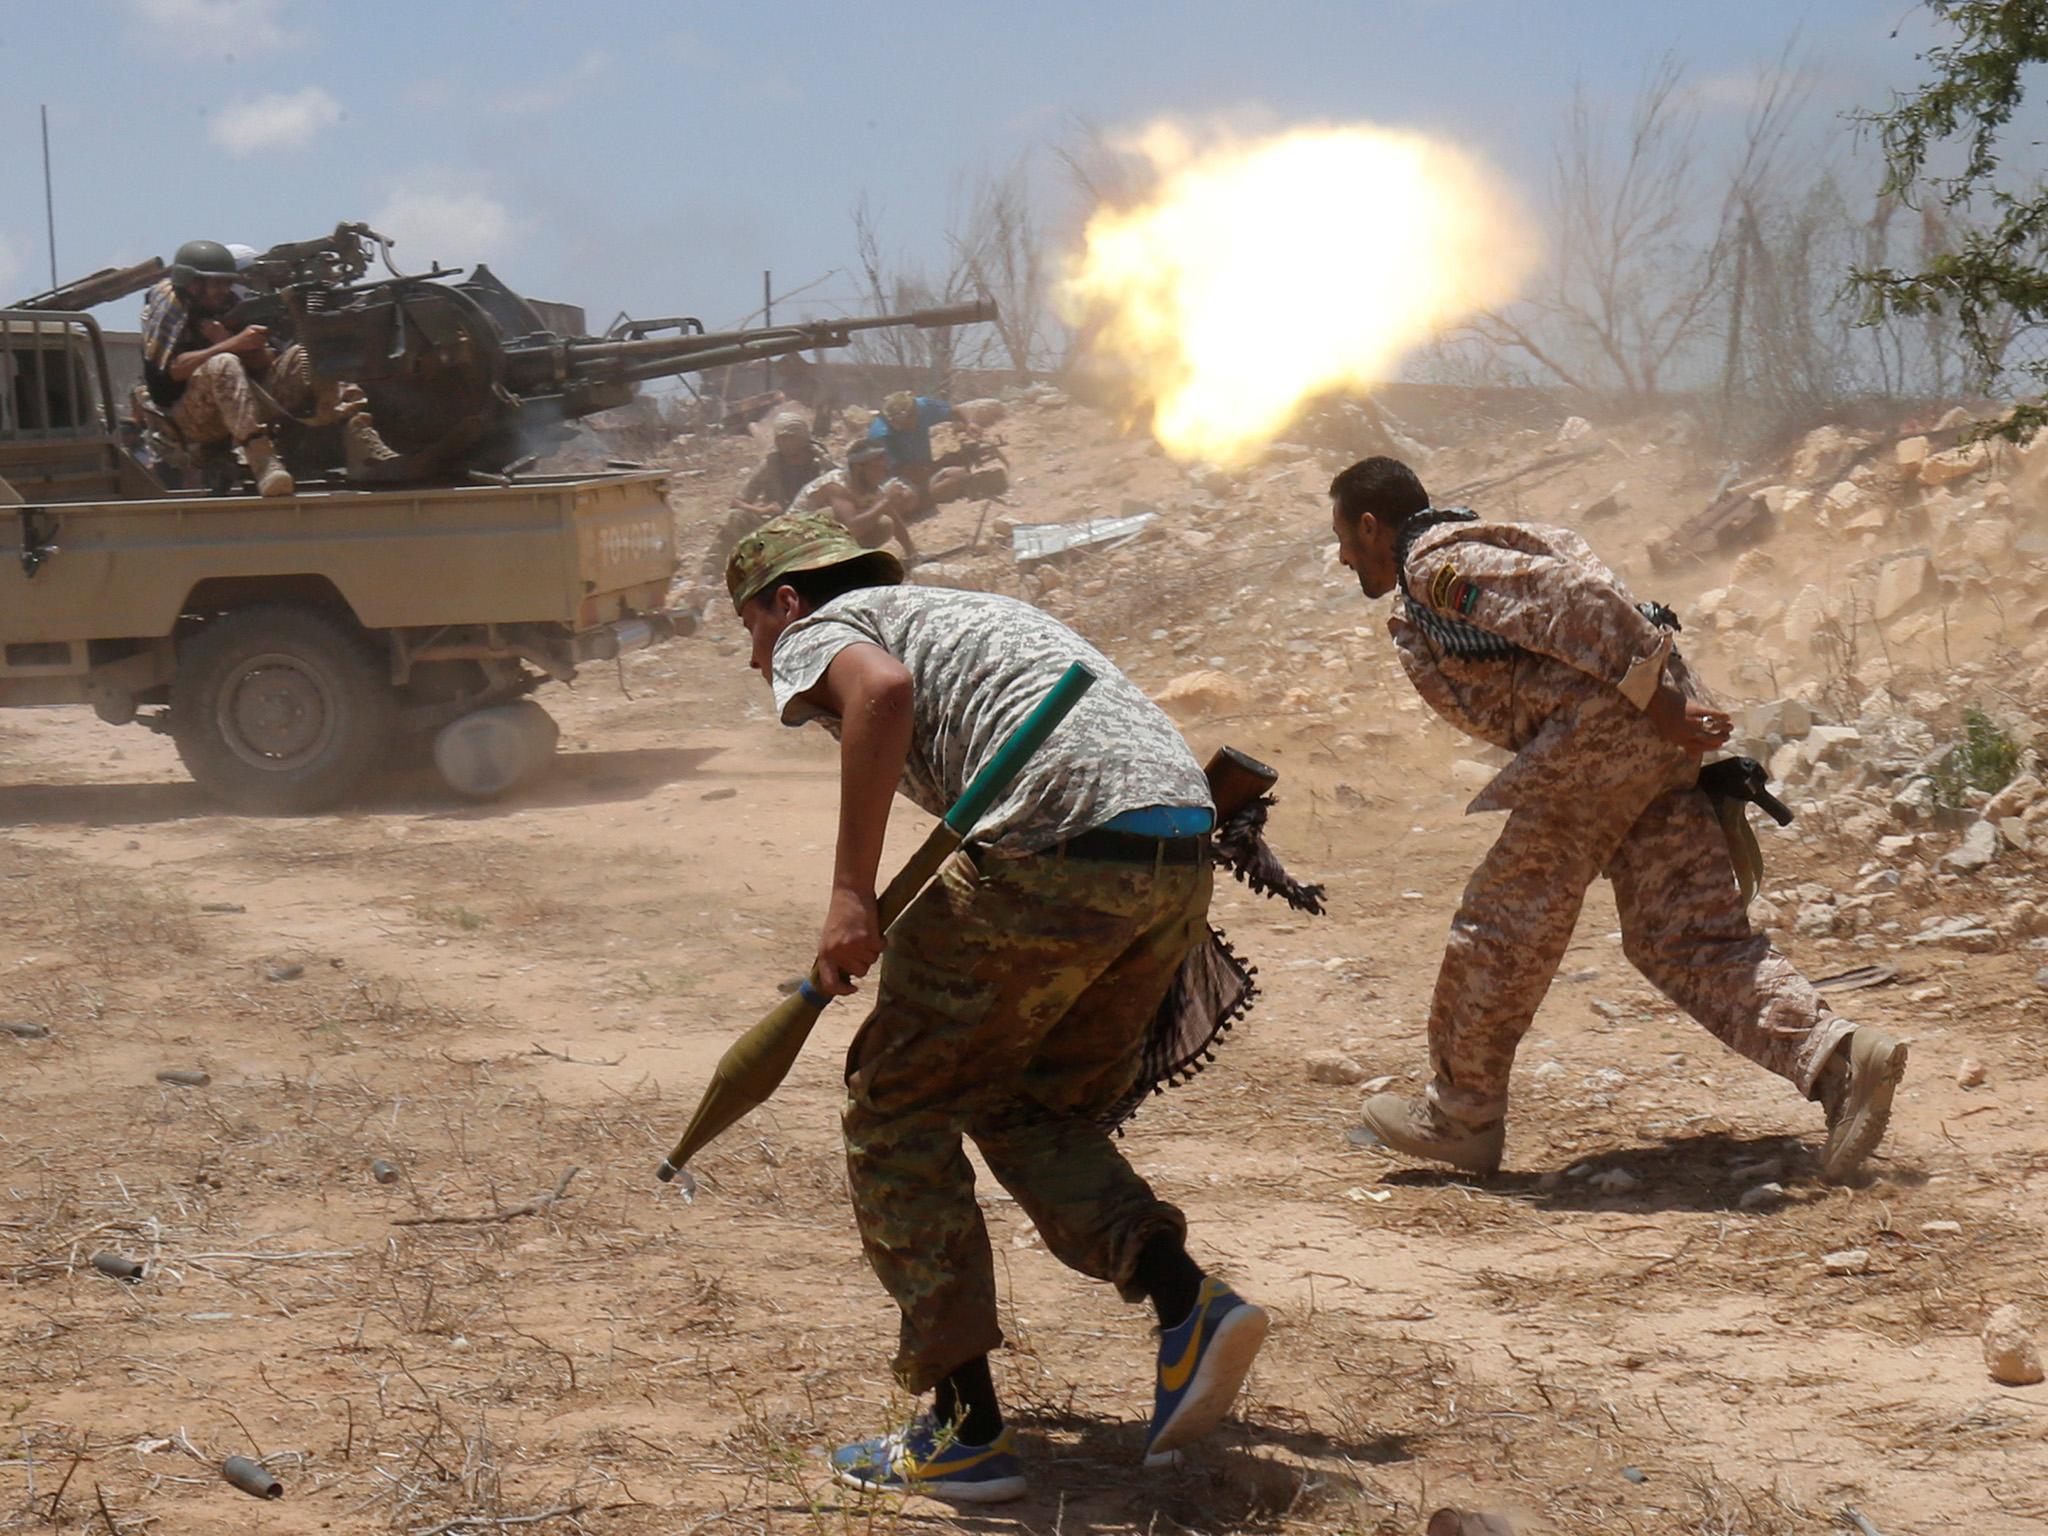 The US has been backing militias fighting to push Isis back in Libya